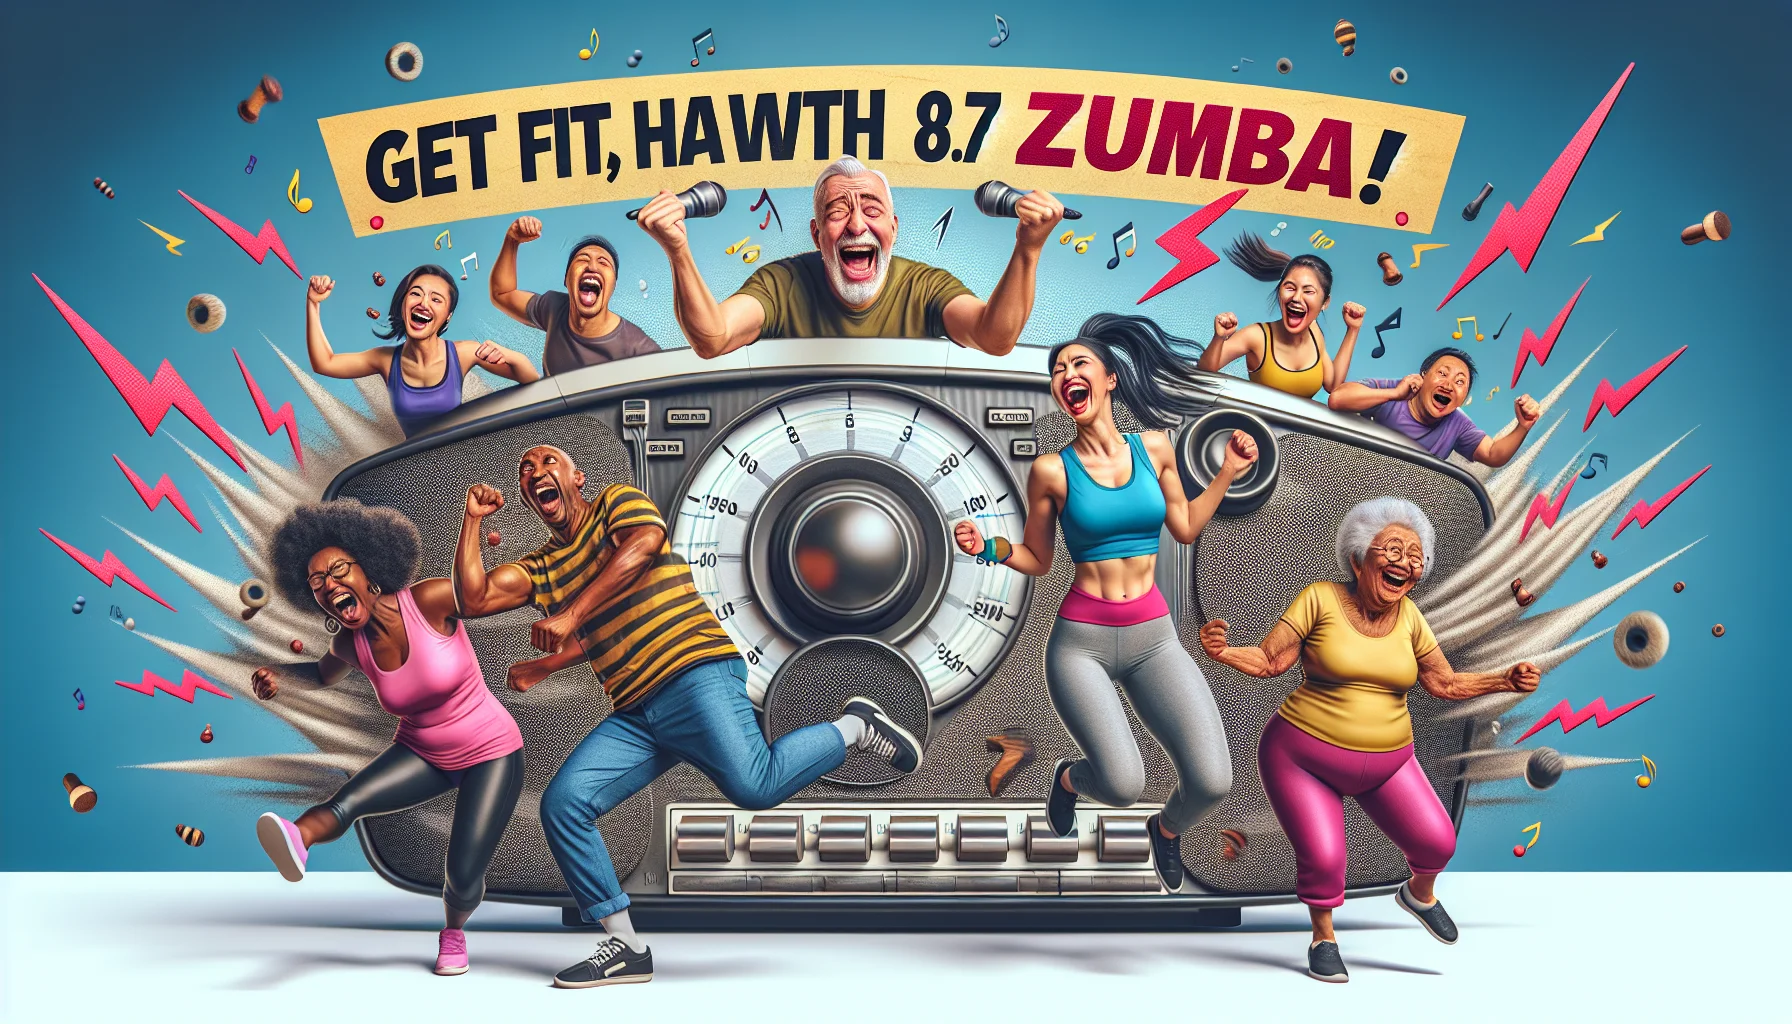 A humorous scenario around a Zumba class broadcasting on a radio station titled 88.7 FM. Capture a diverse display of people - a middle-aged Caucasian man hilariously struggling to keep up with the routine, a young Hispanic woman laughing and dancing with total abandonment, a South Asian elderly woman showing surprising agility, and an African American instructor with an infectious enthusiasm. The radio's sound waves should be visible, transforming into lively, energetic forms symbolizing movement and dance. A bold, catchy headline like 'Get Fit, Have Fun with 88.7 Zumba!' encourages people to join.